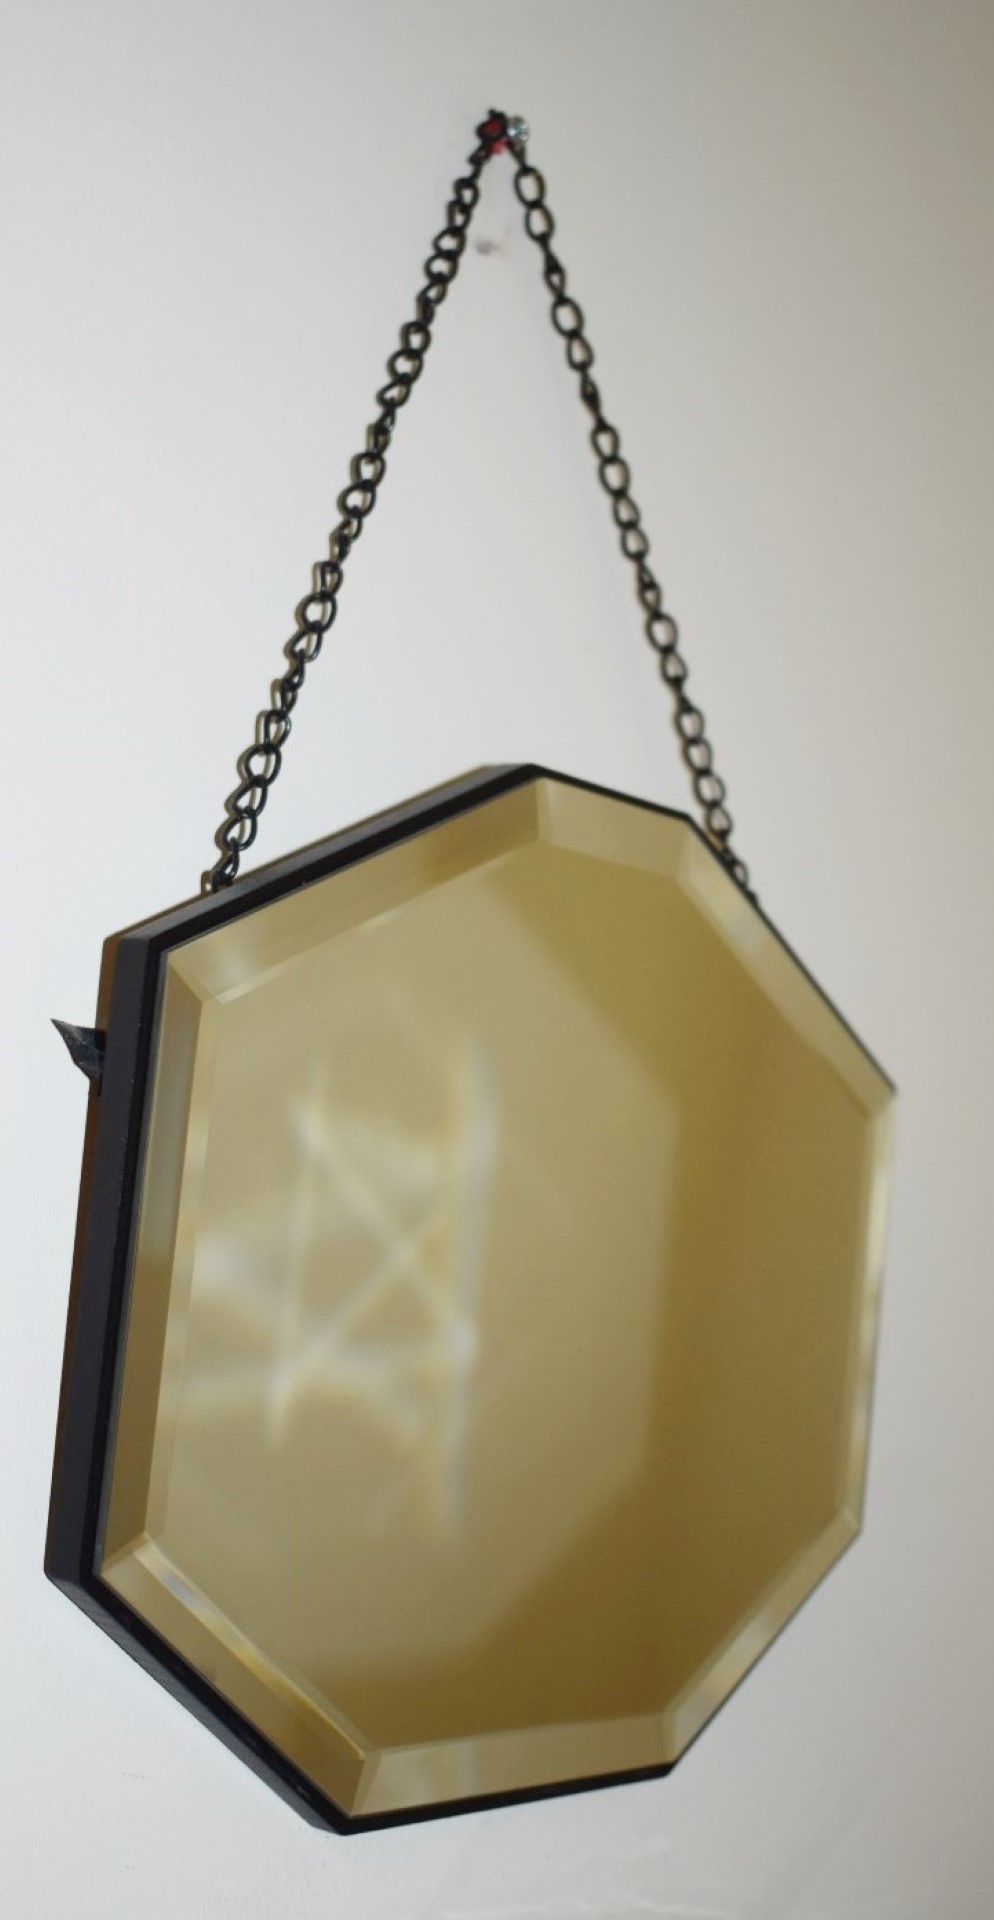 3 x Small Wall Hanging Bathroom Mirrors - Image 3 of 3